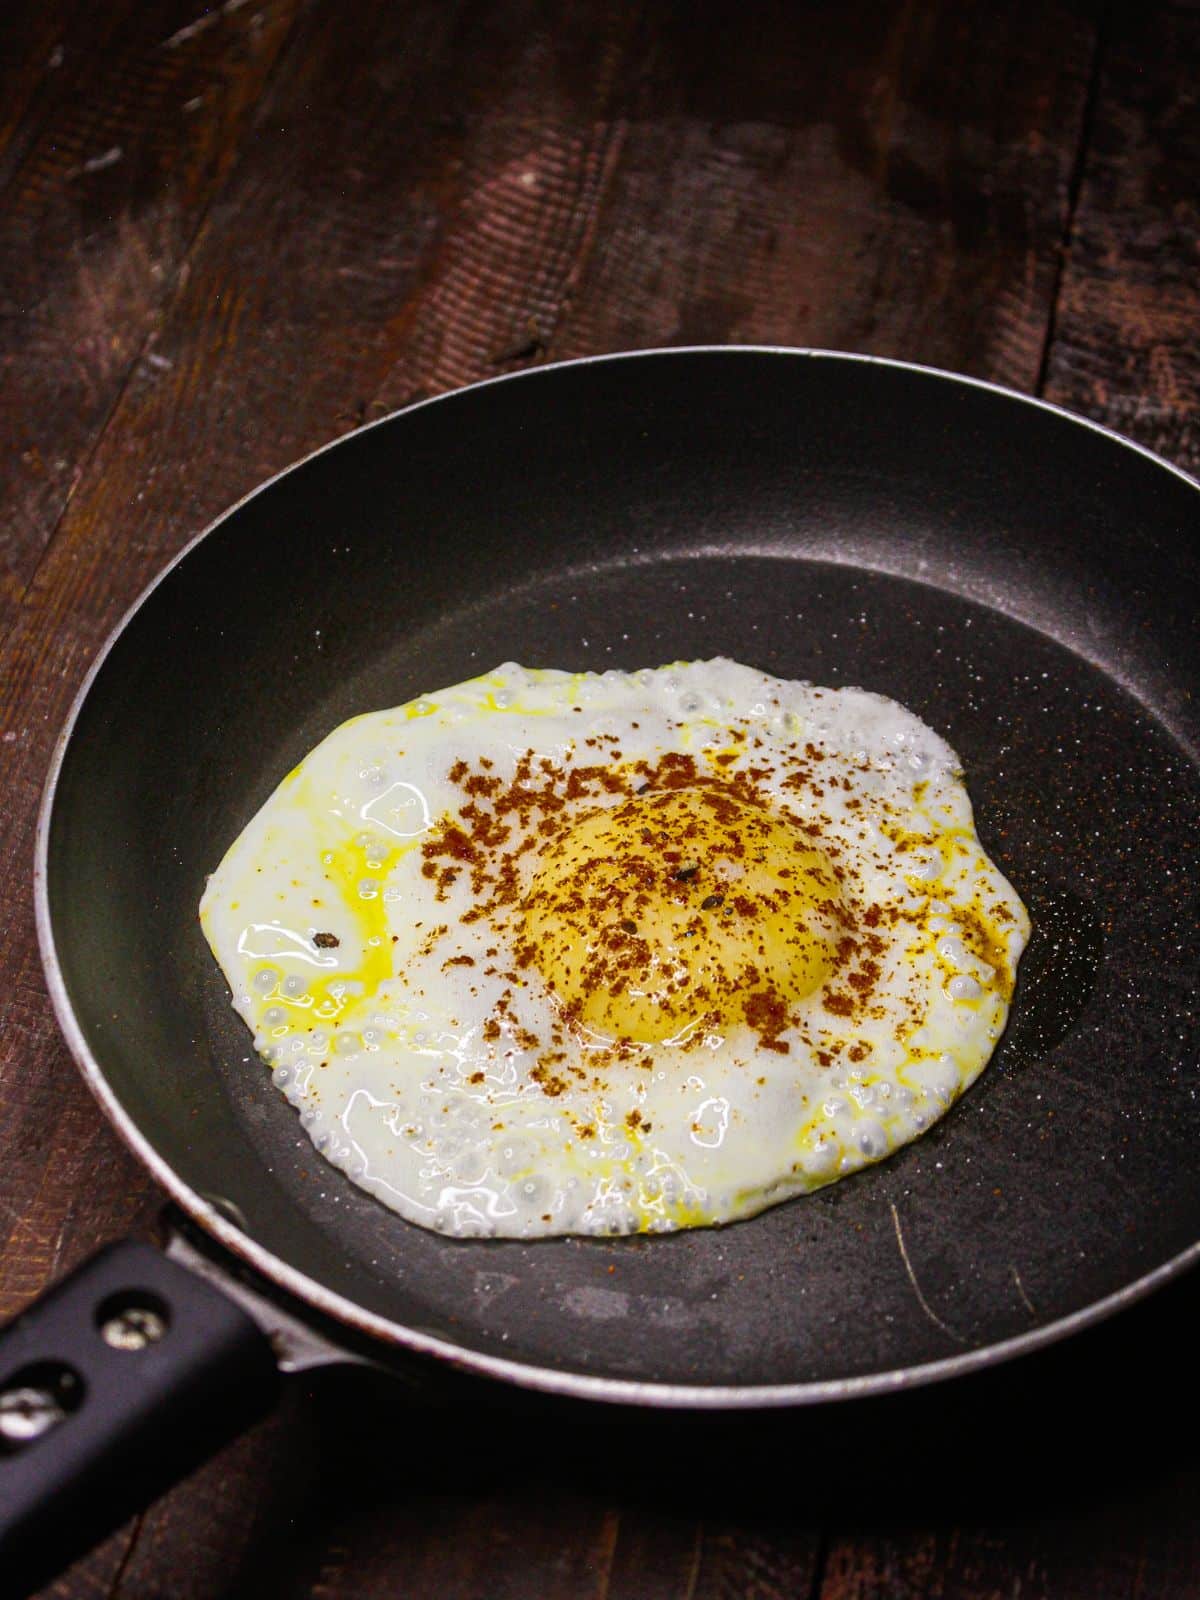 Cook half fry egg in another pan and add paprika powder over it  